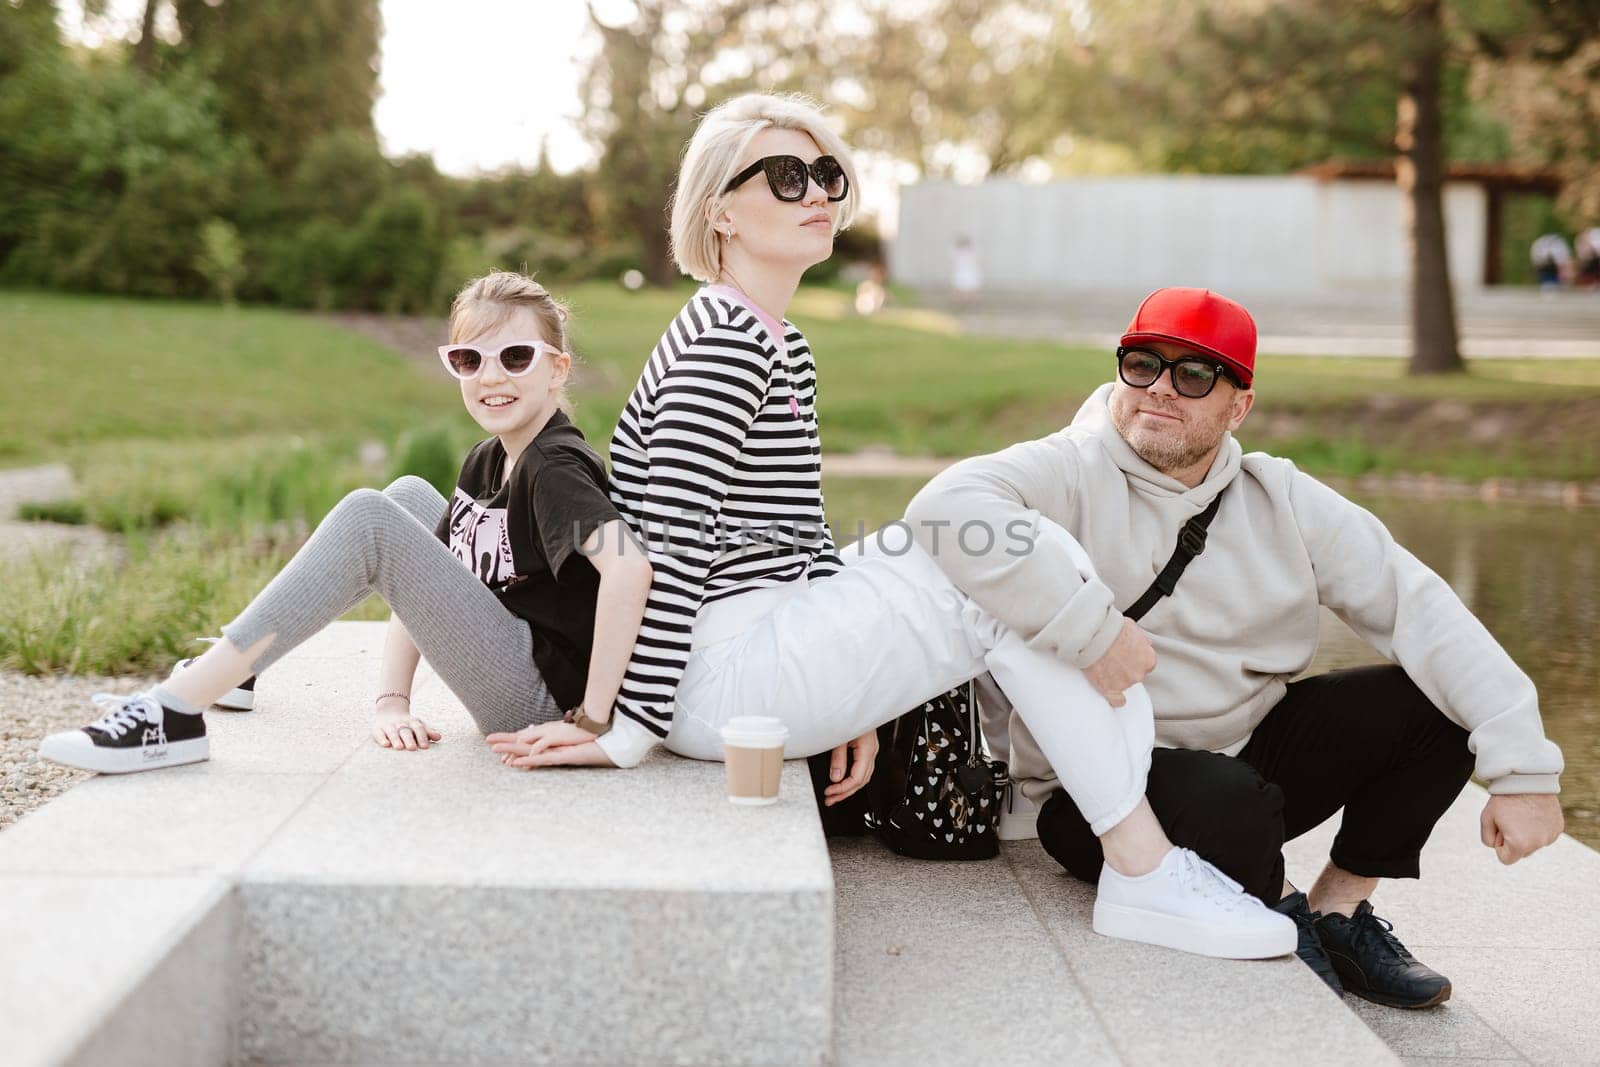 Young family with their daughter at park having fun together.